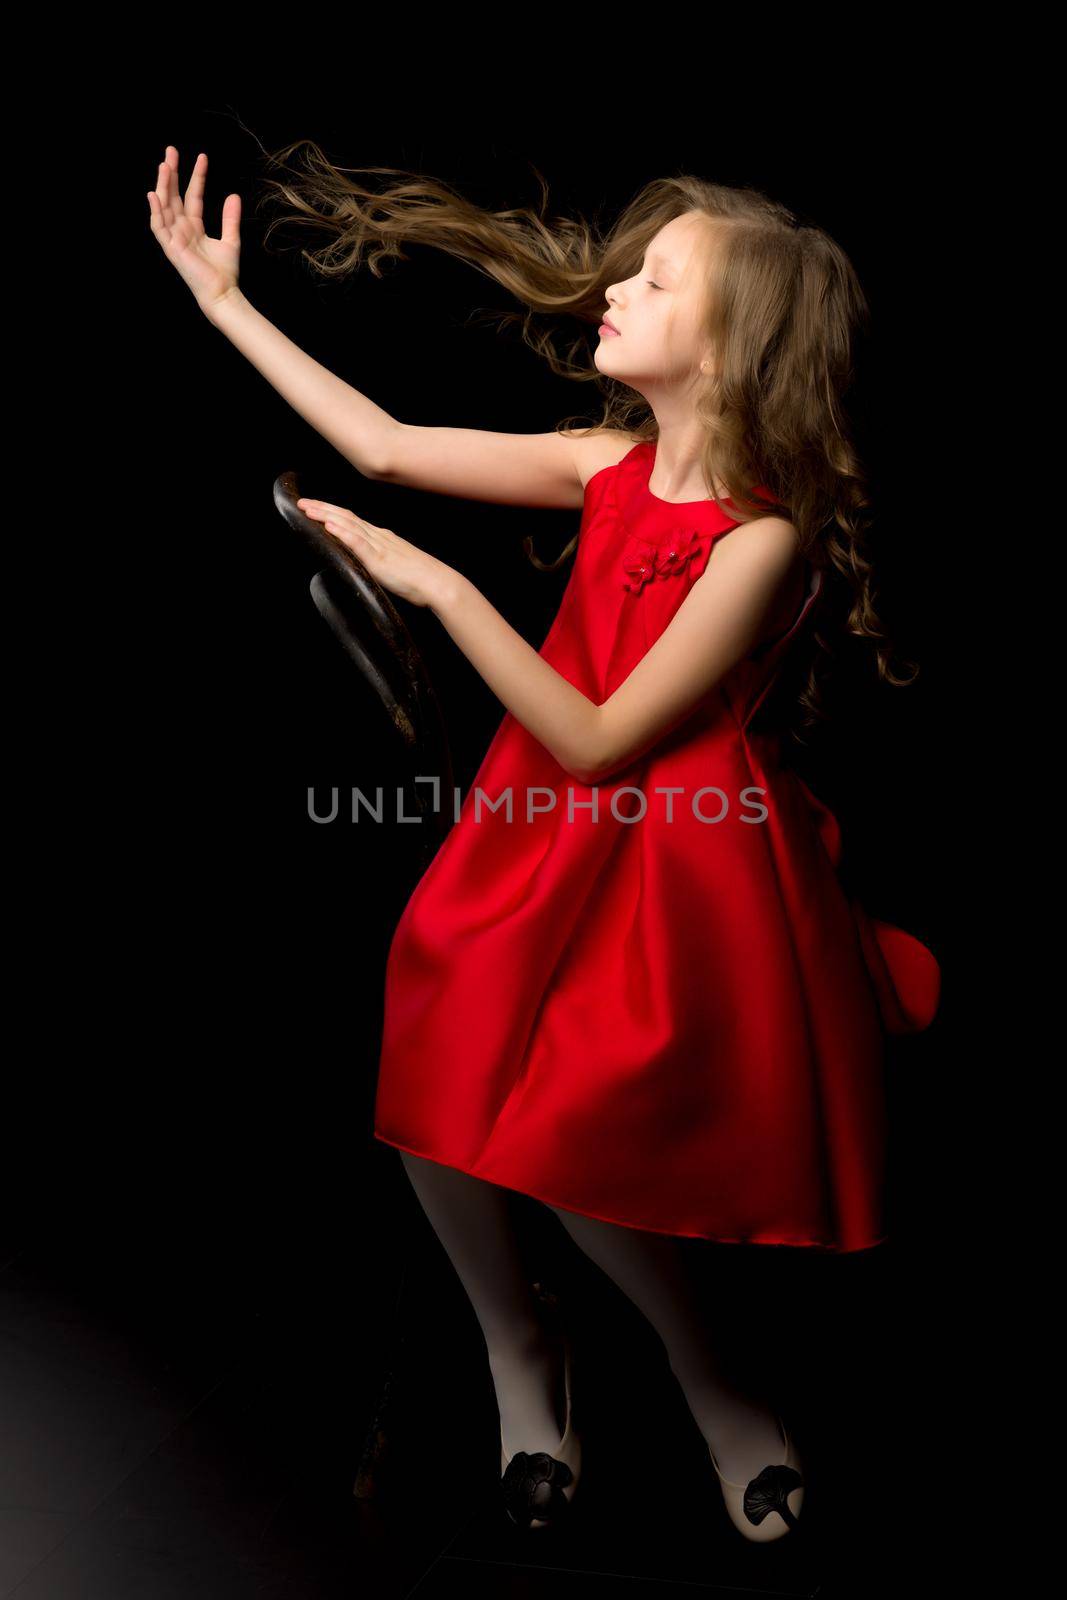 Inspired Beautiful Girl Wearing Red Nice Dress Sitting on Chair Posing at Camera, Portrait of Charming Girl with Flying Long Hair Looking to the Side Against Black Background